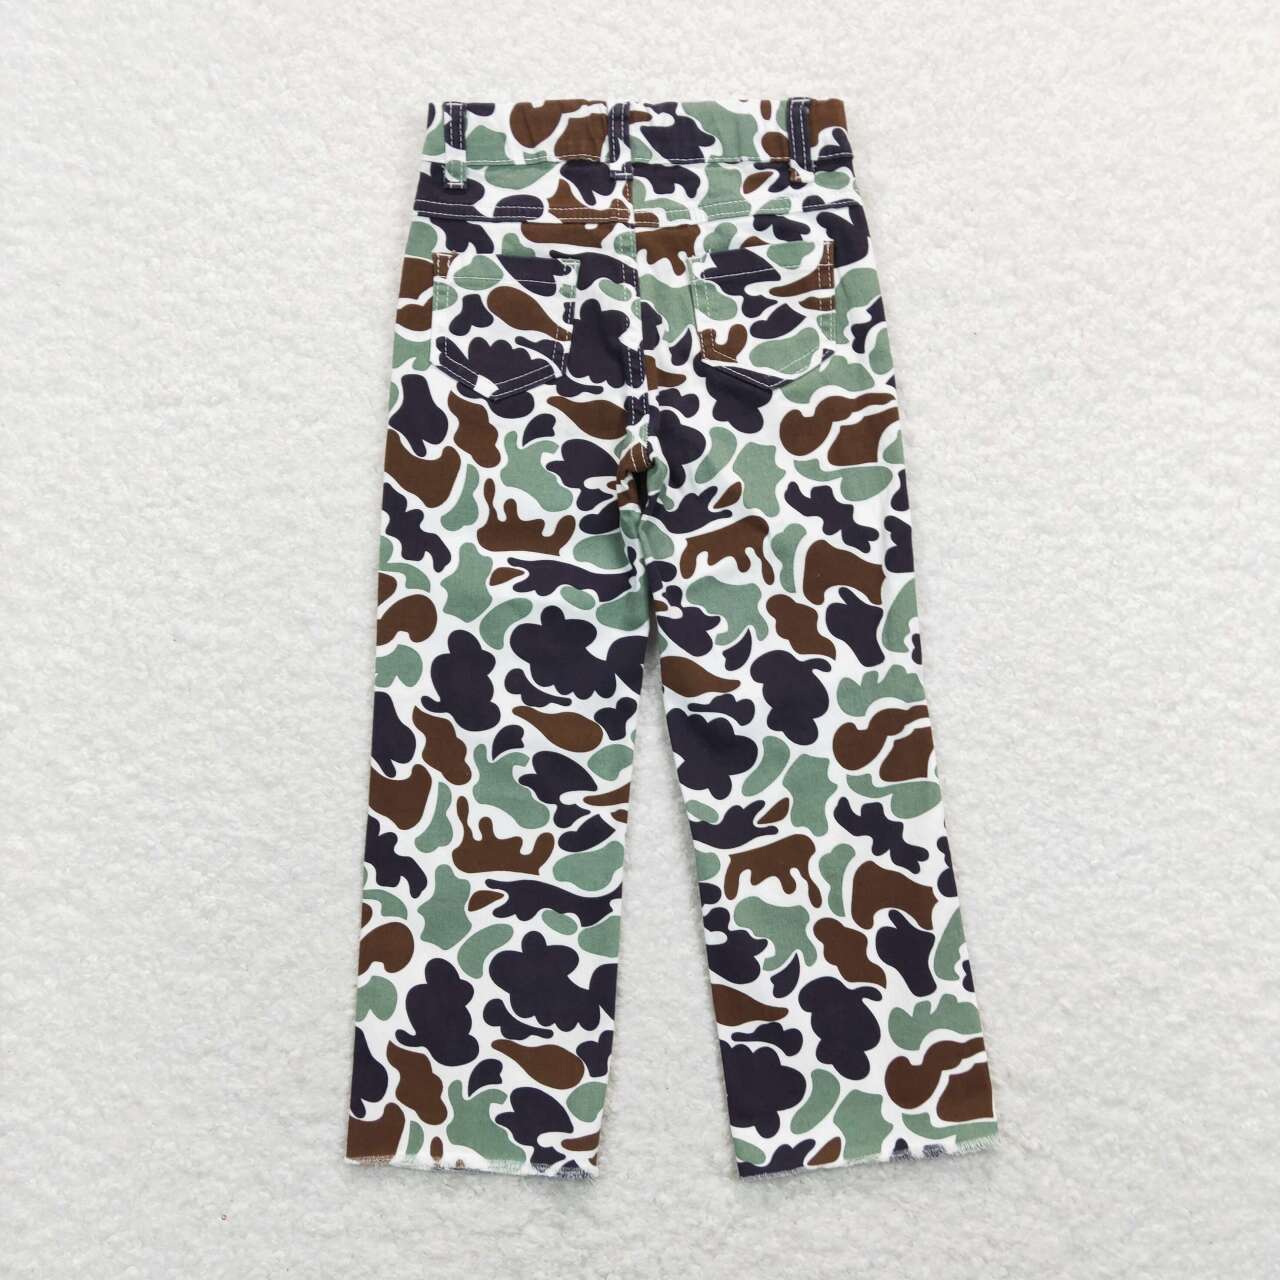 P0413 Brown and green camouflage ripped denim trousers